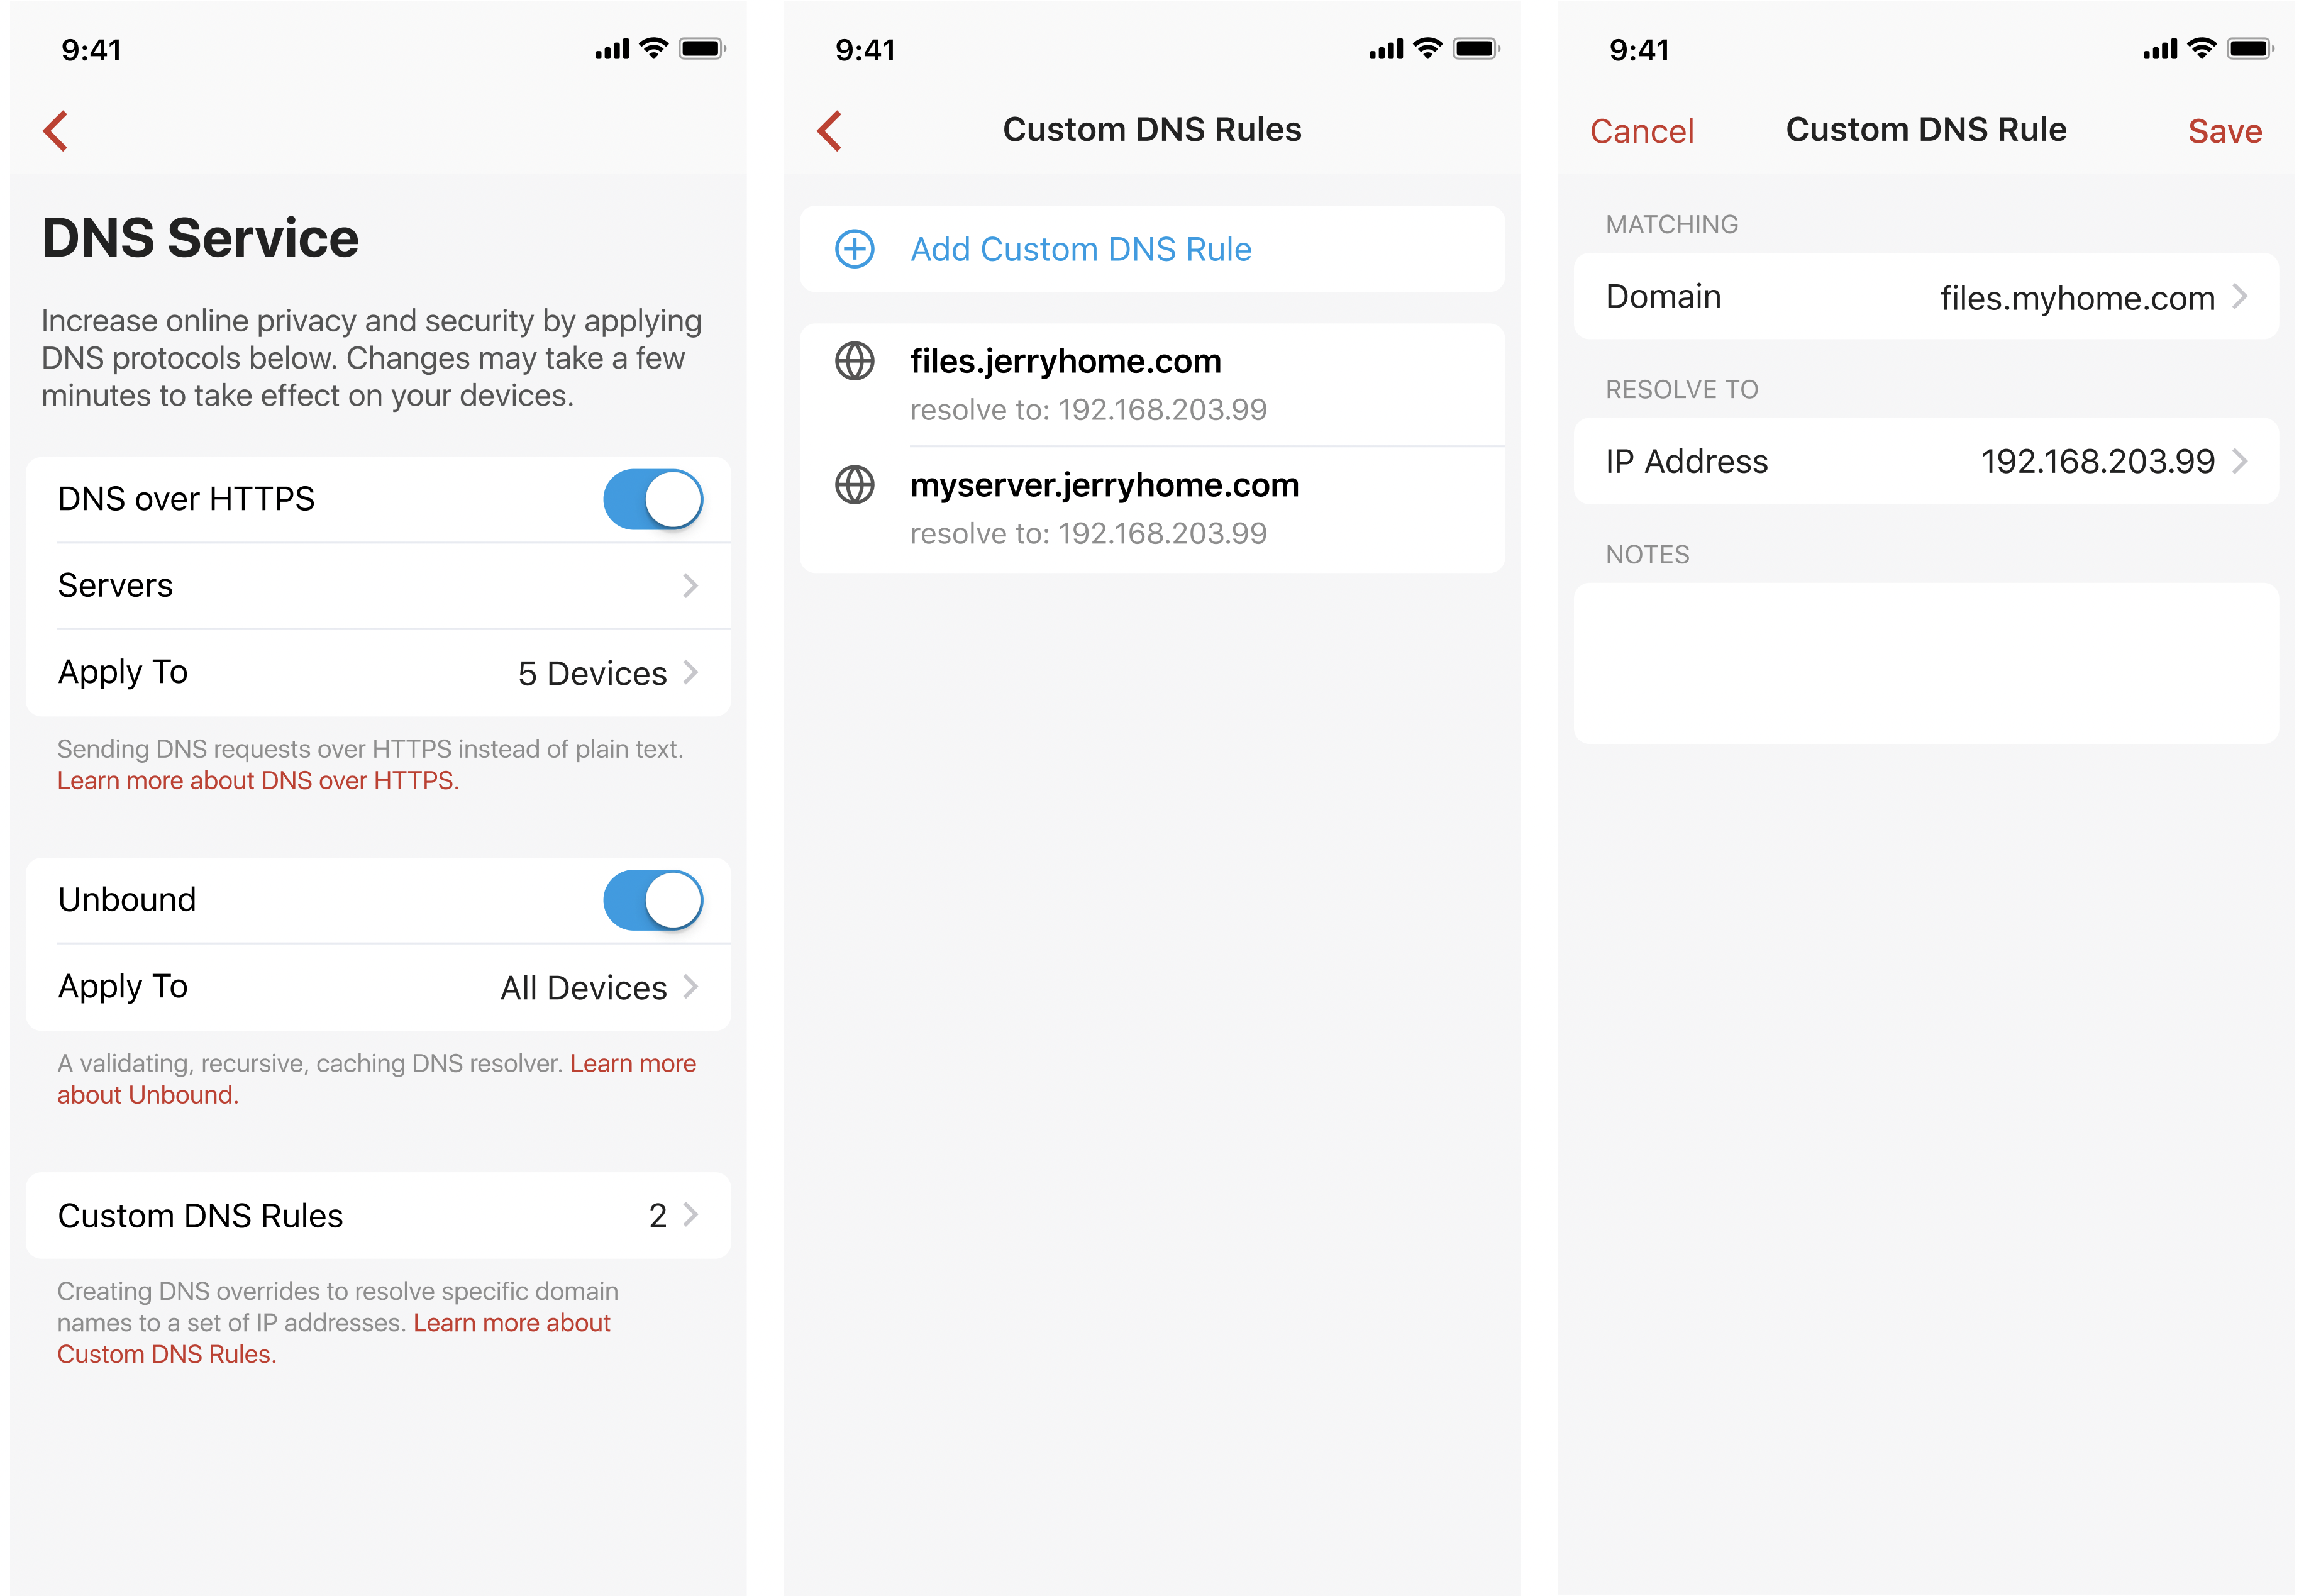 Connect to the VPN In App Demo of the DNS service step.